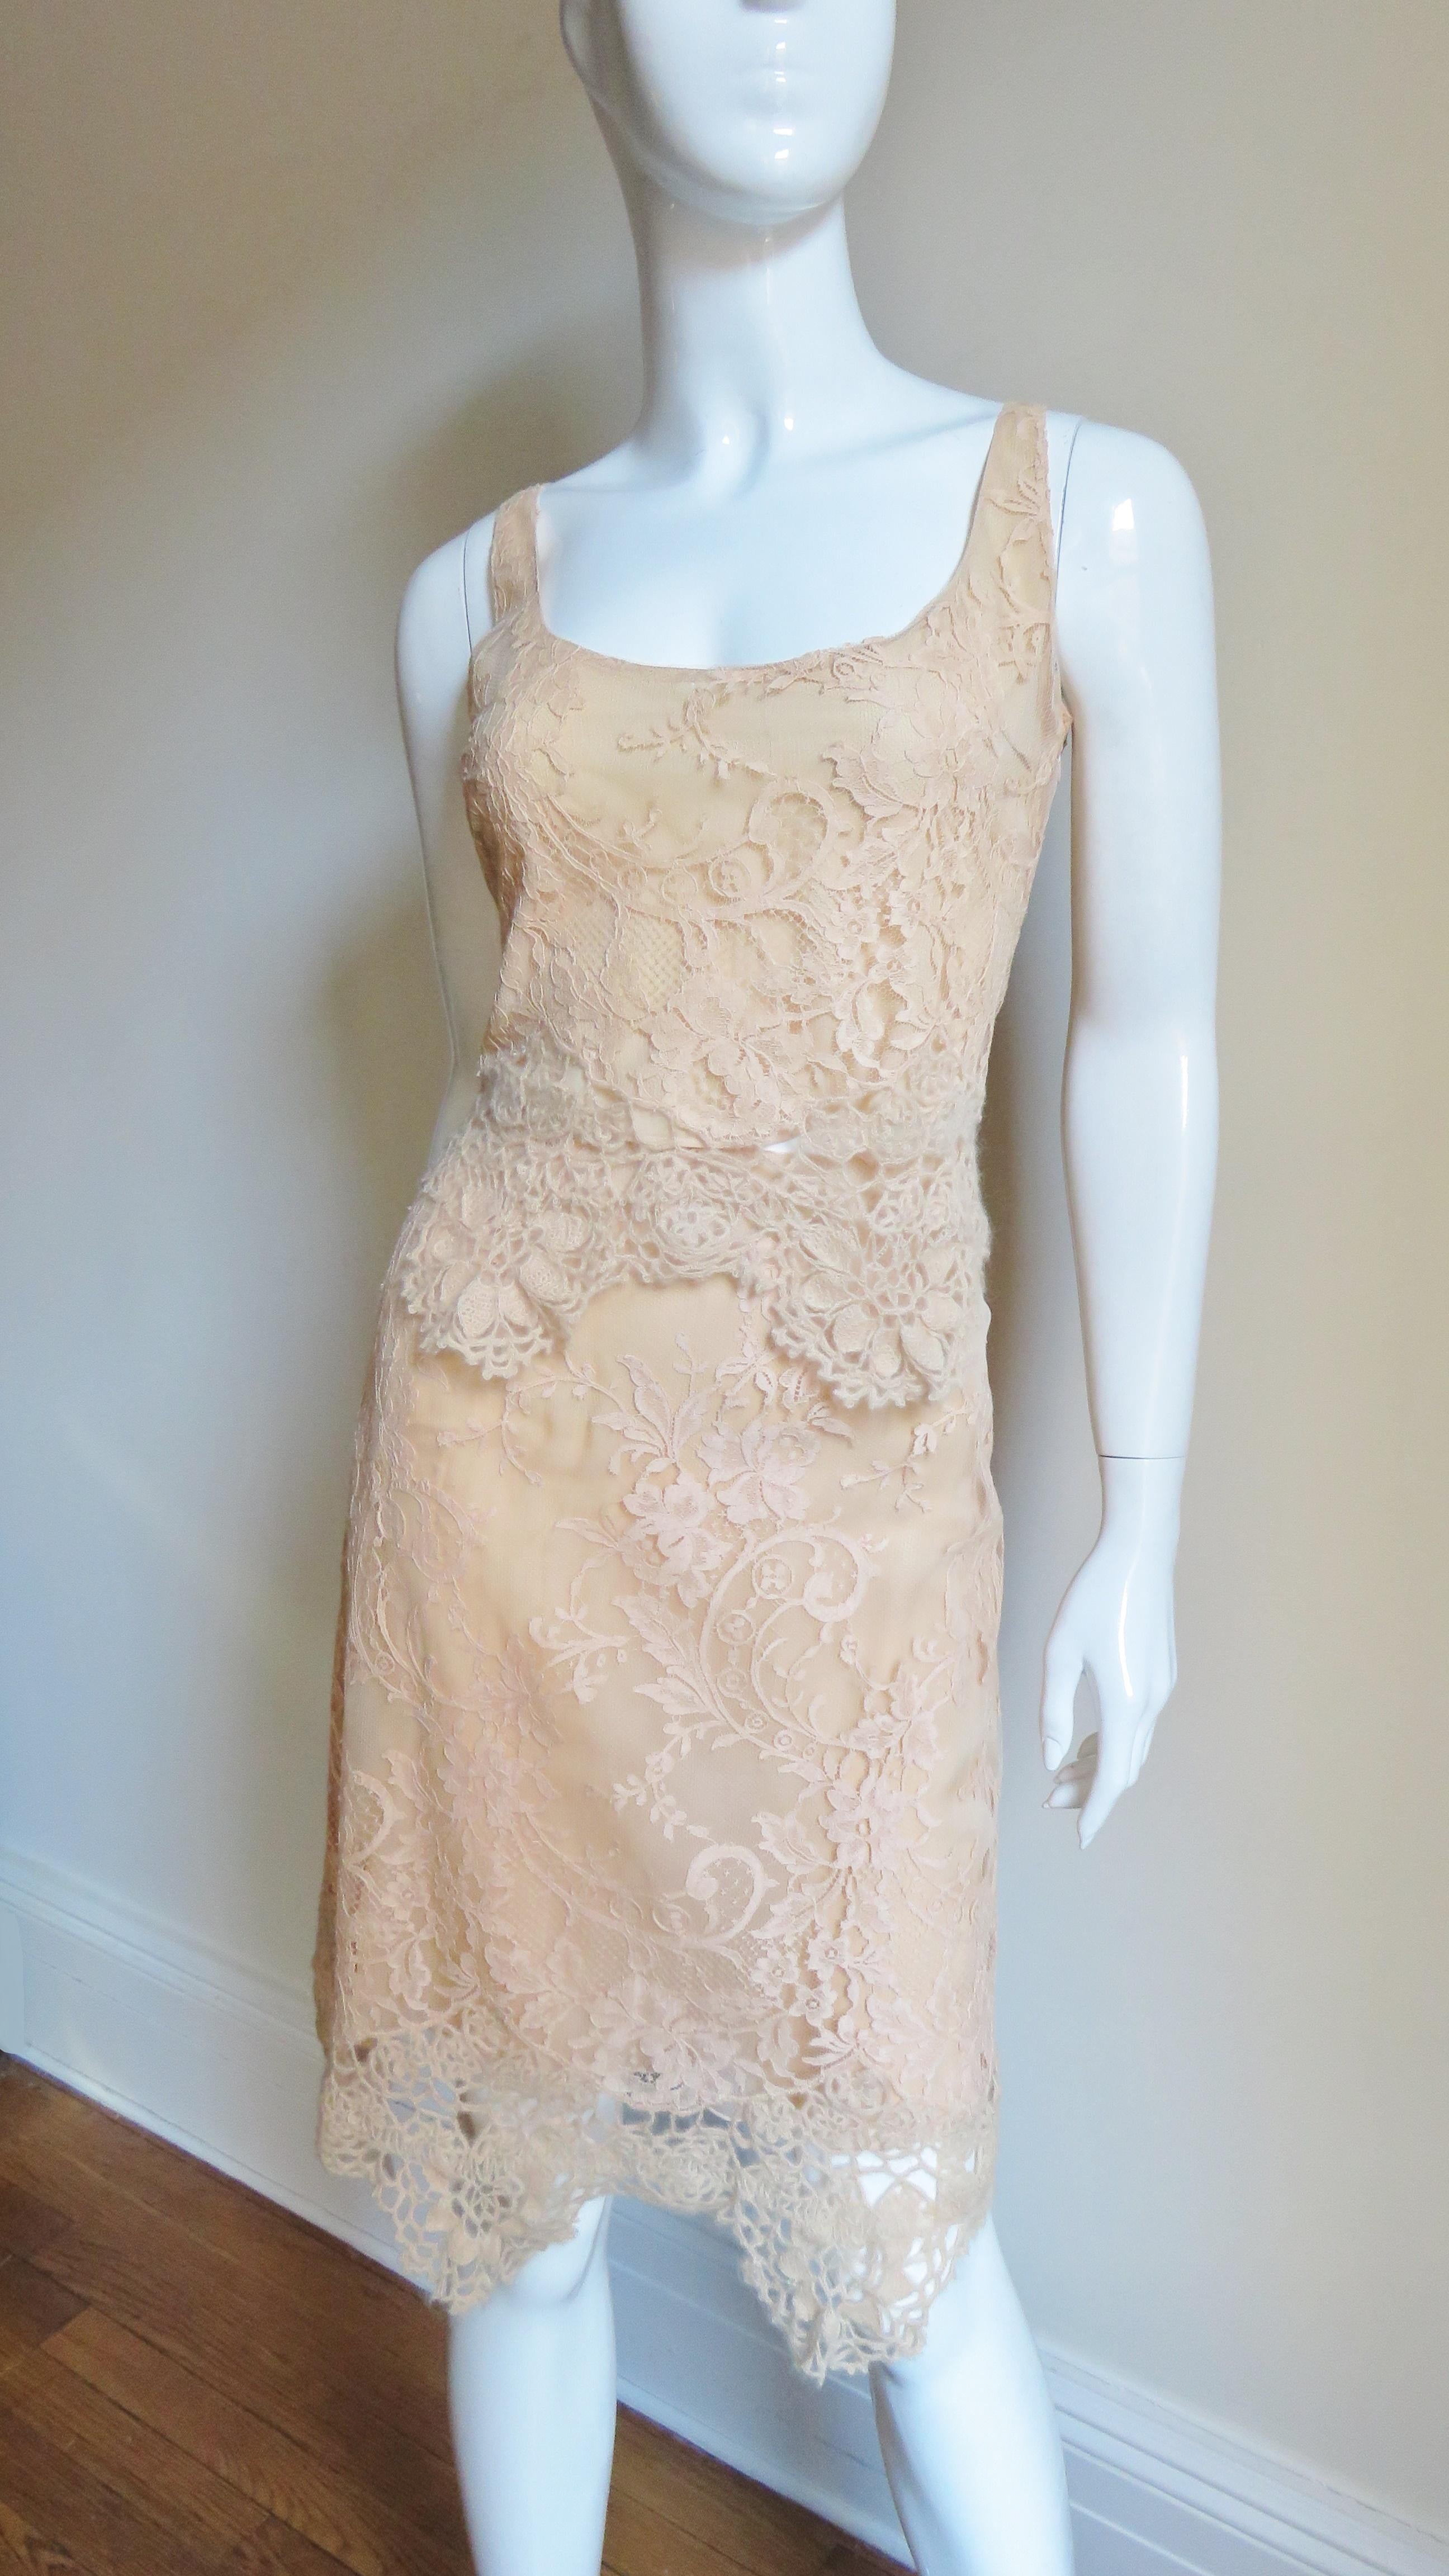 A beautiful 2 piece peach beige silk flower lace skirt and camisole set from Valentino.  The scoop neck lace camisole style top and subtle A line skirt have a horizontal panel of matching knit and crochet flower trim at their hem adding extra